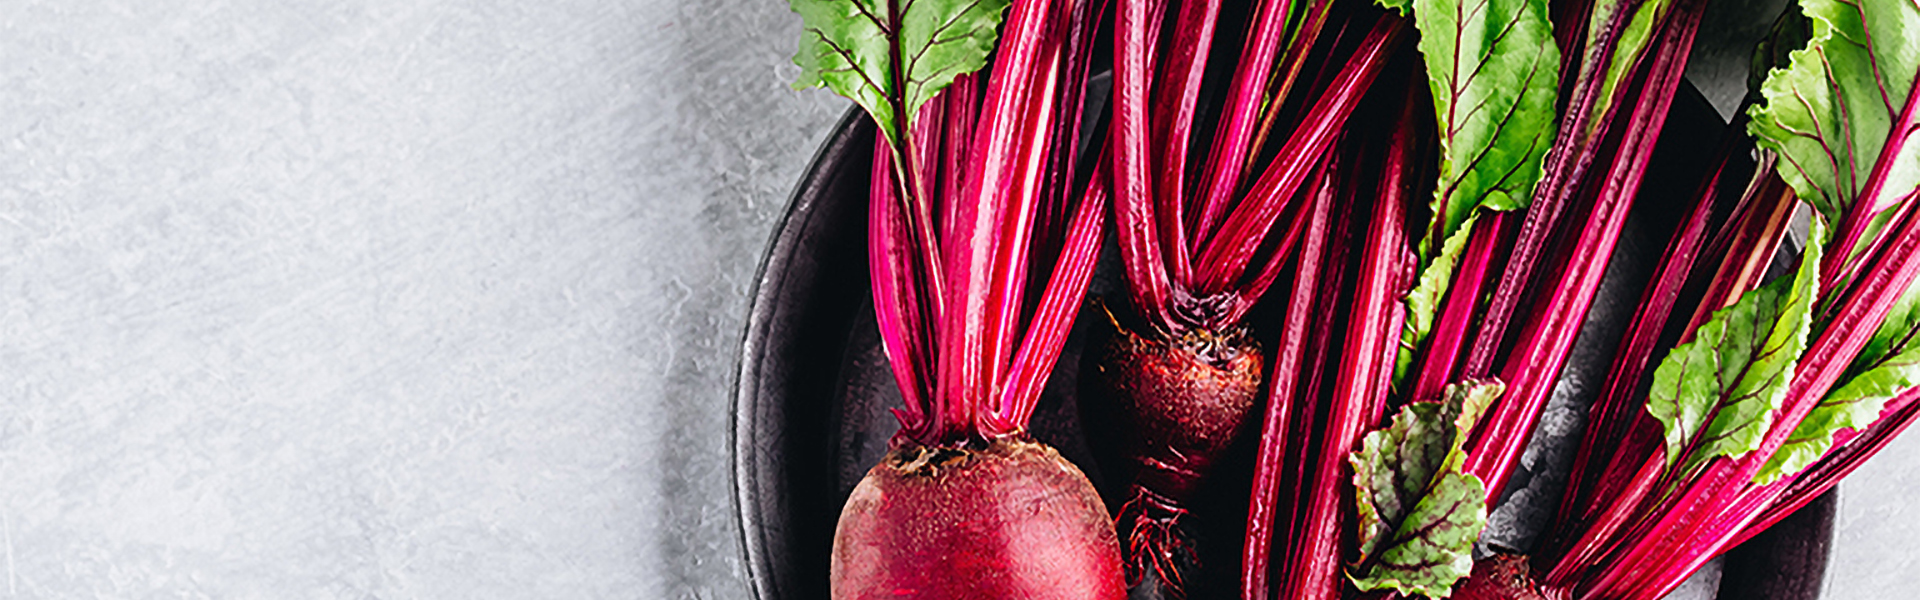 Know Your Food: Beets